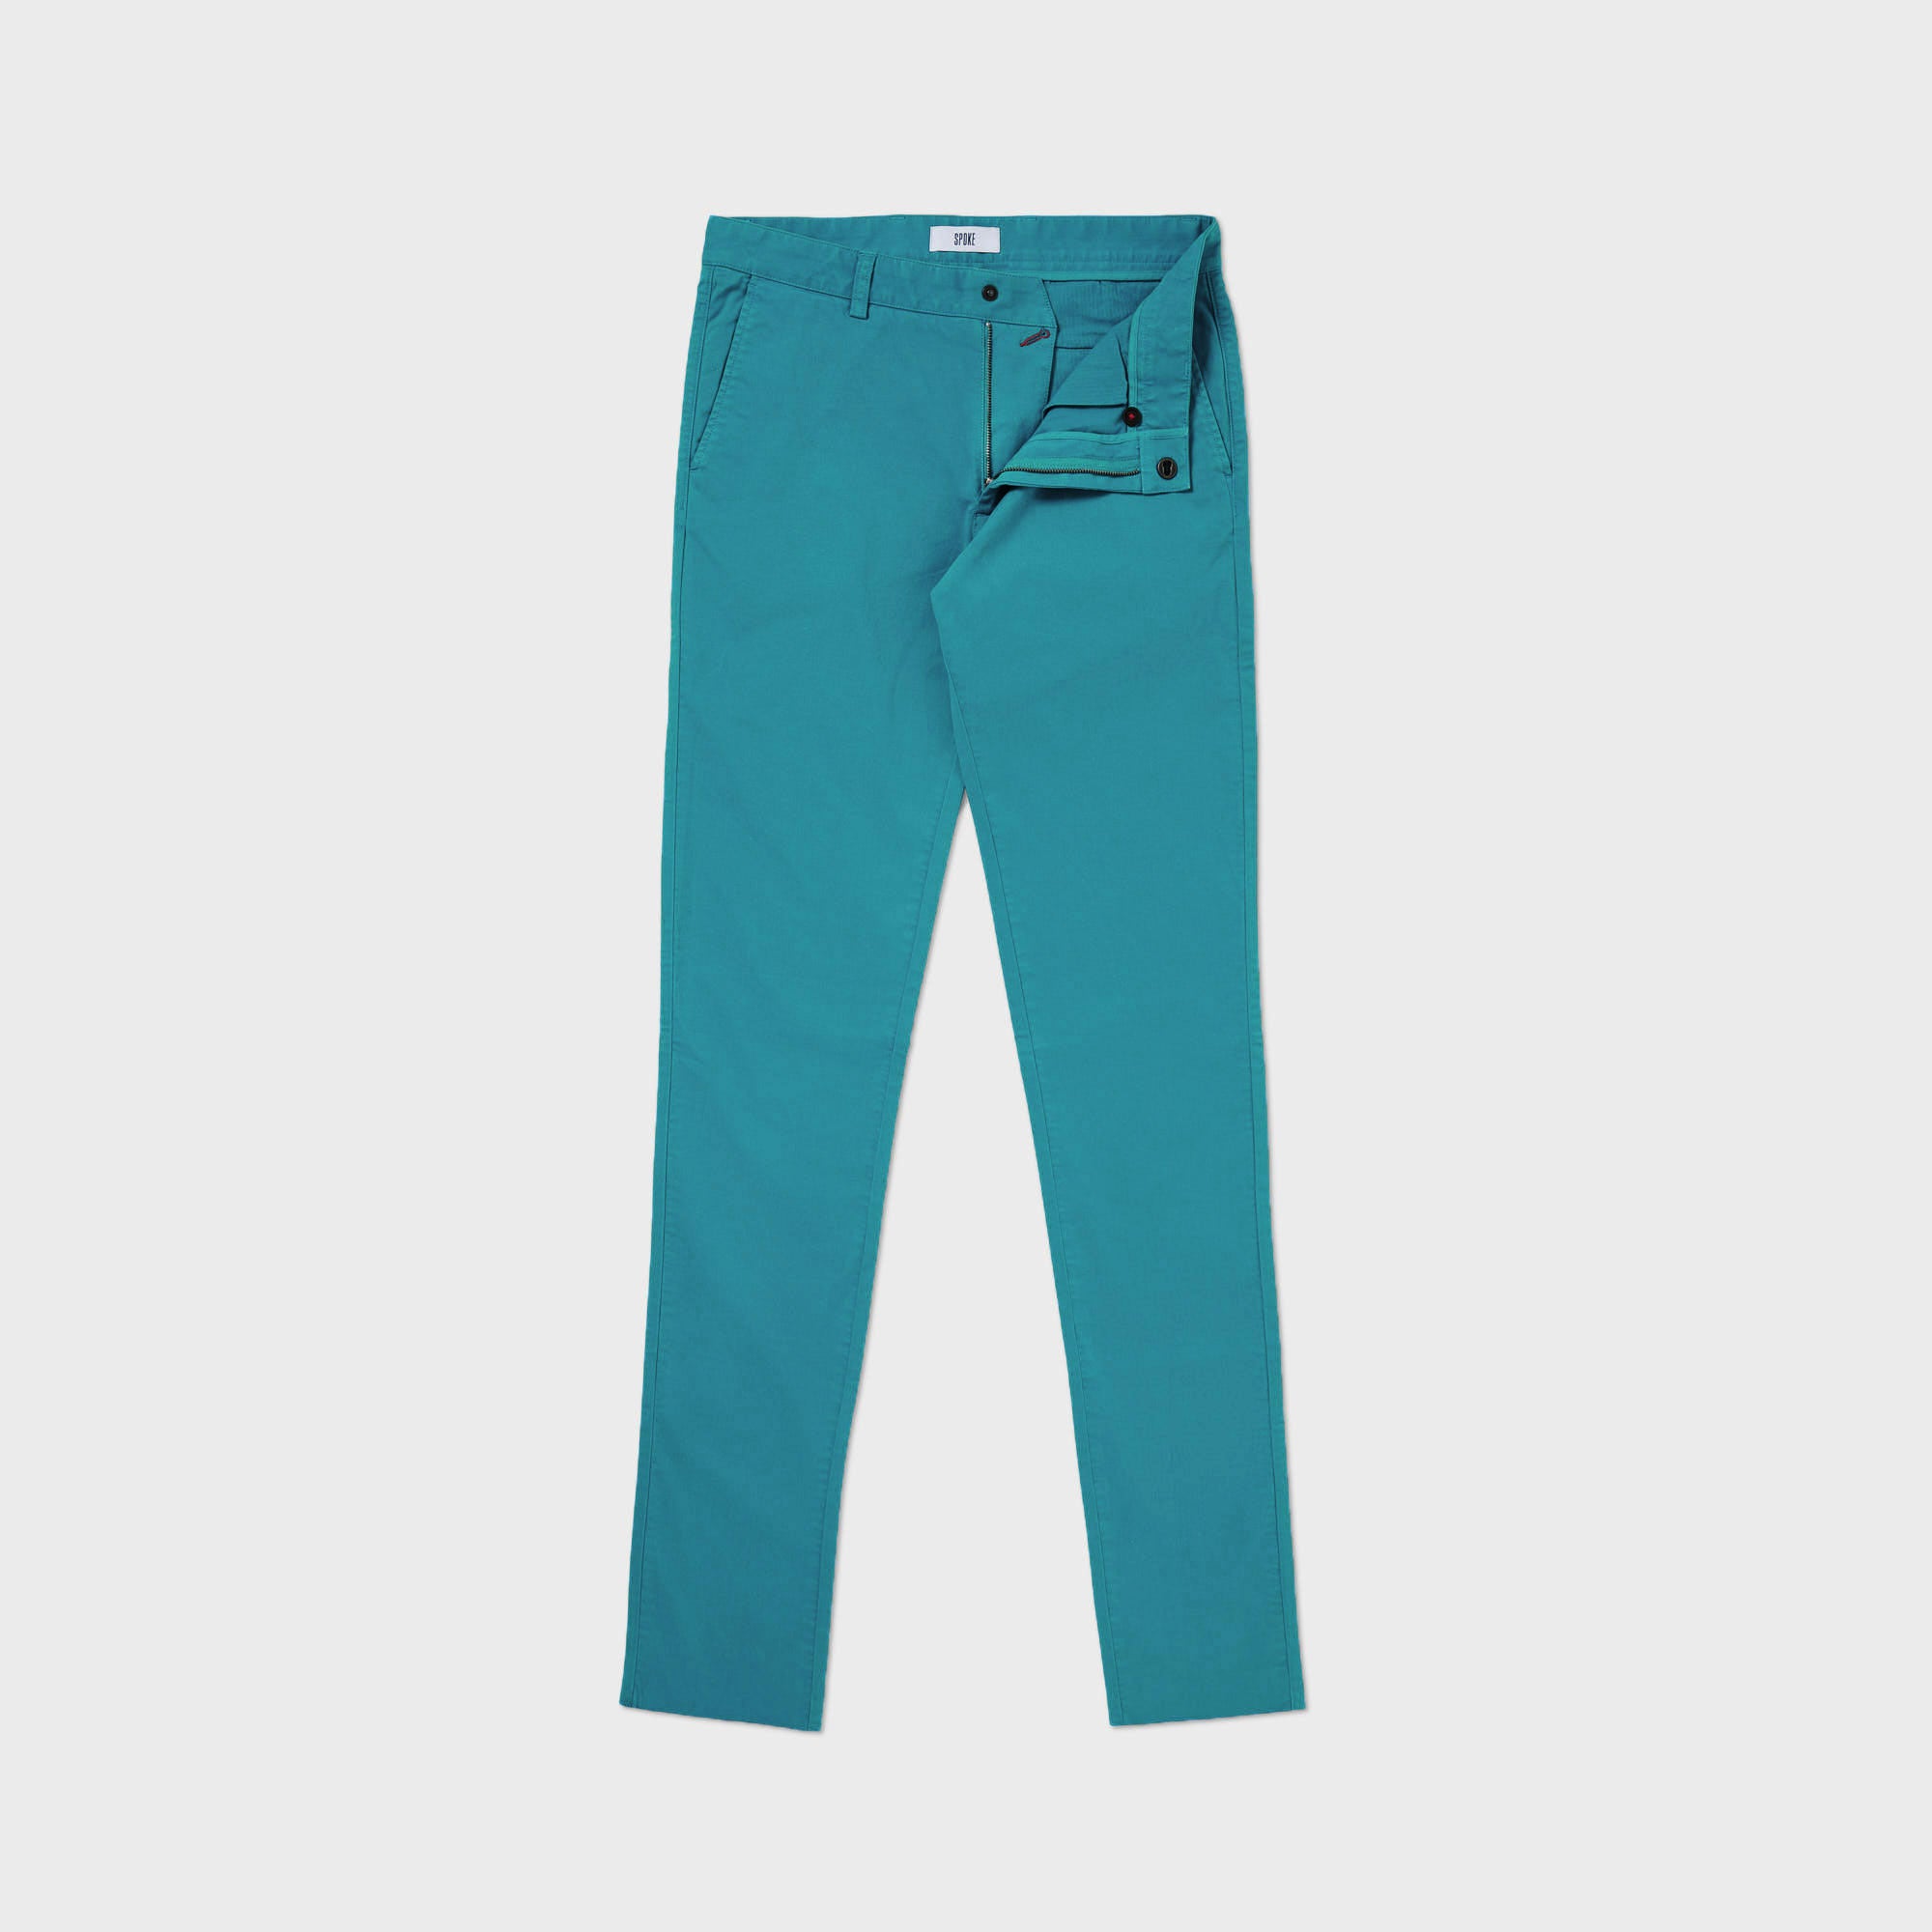 Turquoise Regular Trousers  Buy Turquoise Regular Trousers Online In India